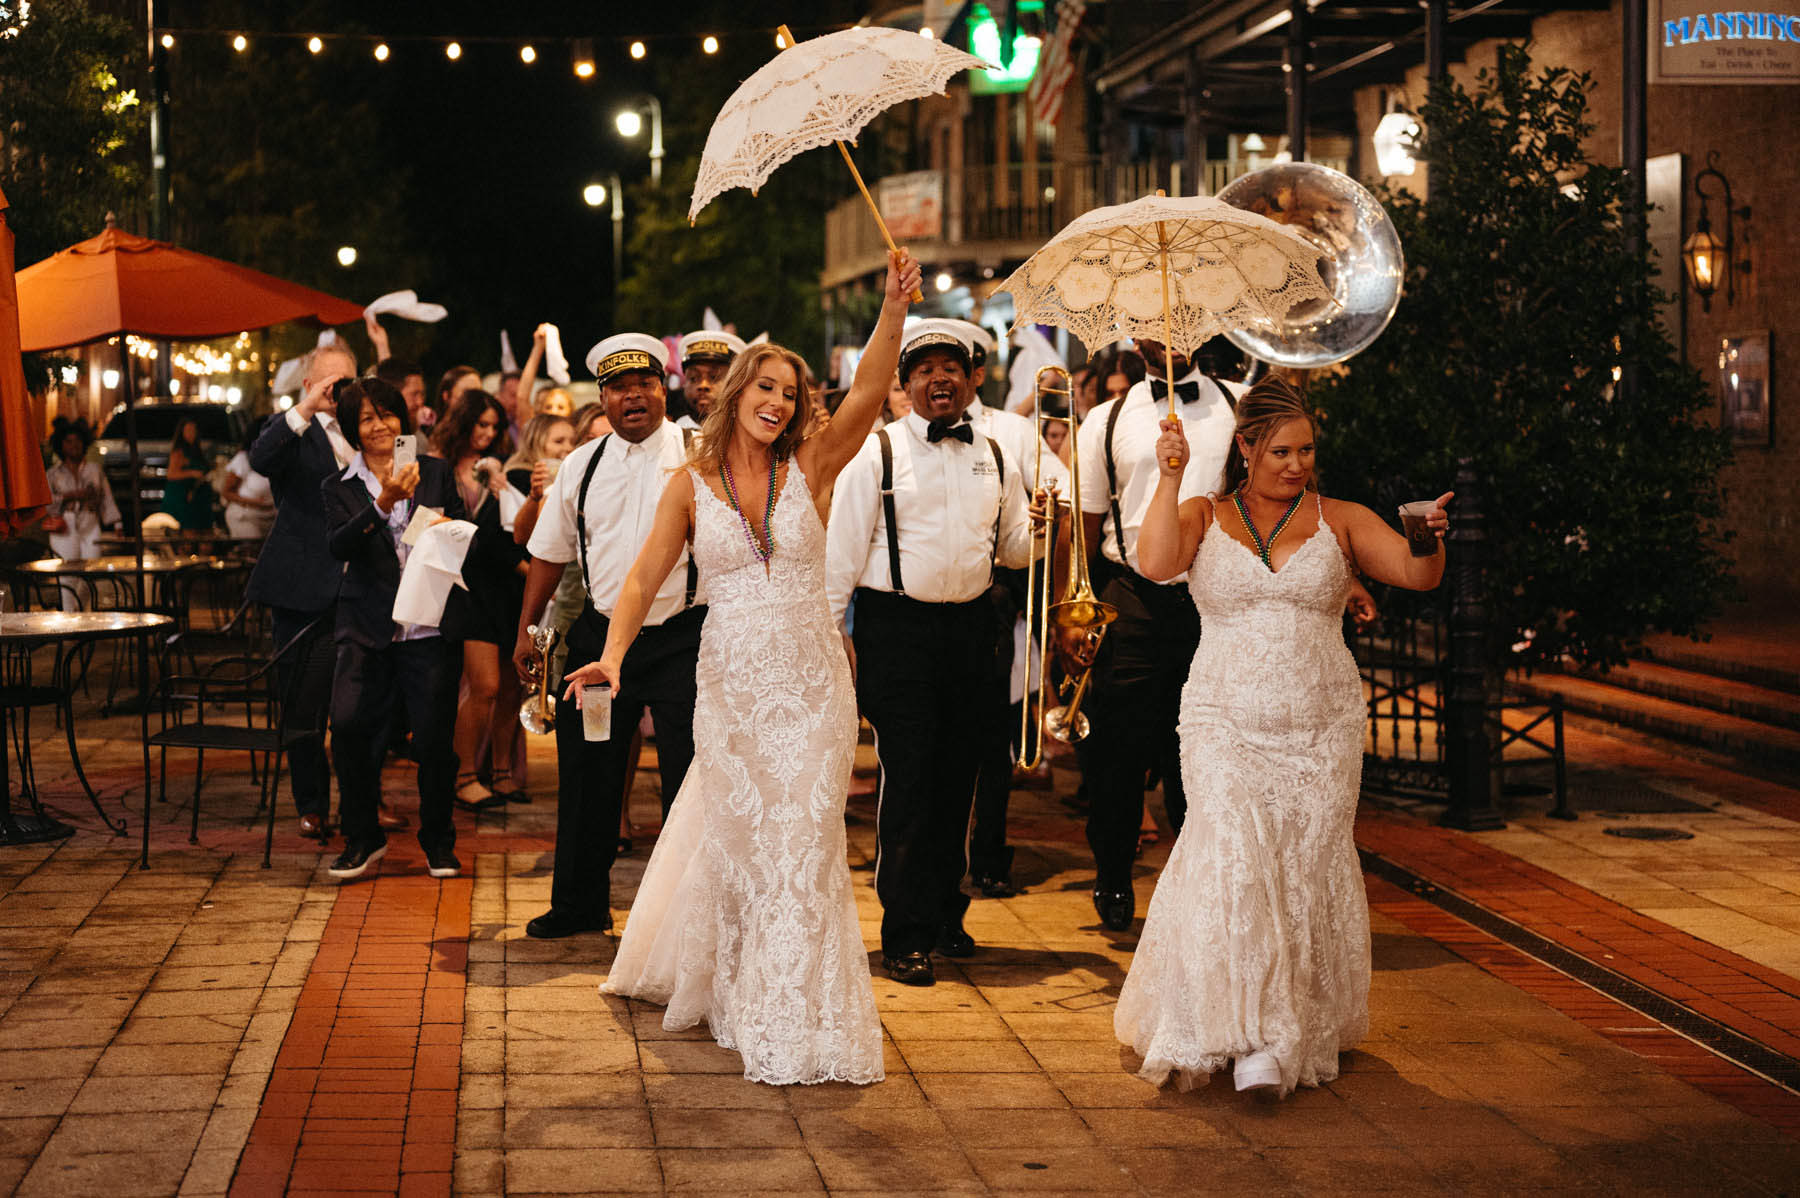 The brides lead a festive second line. They are holding white umbrellas and followed bu a jazz band.